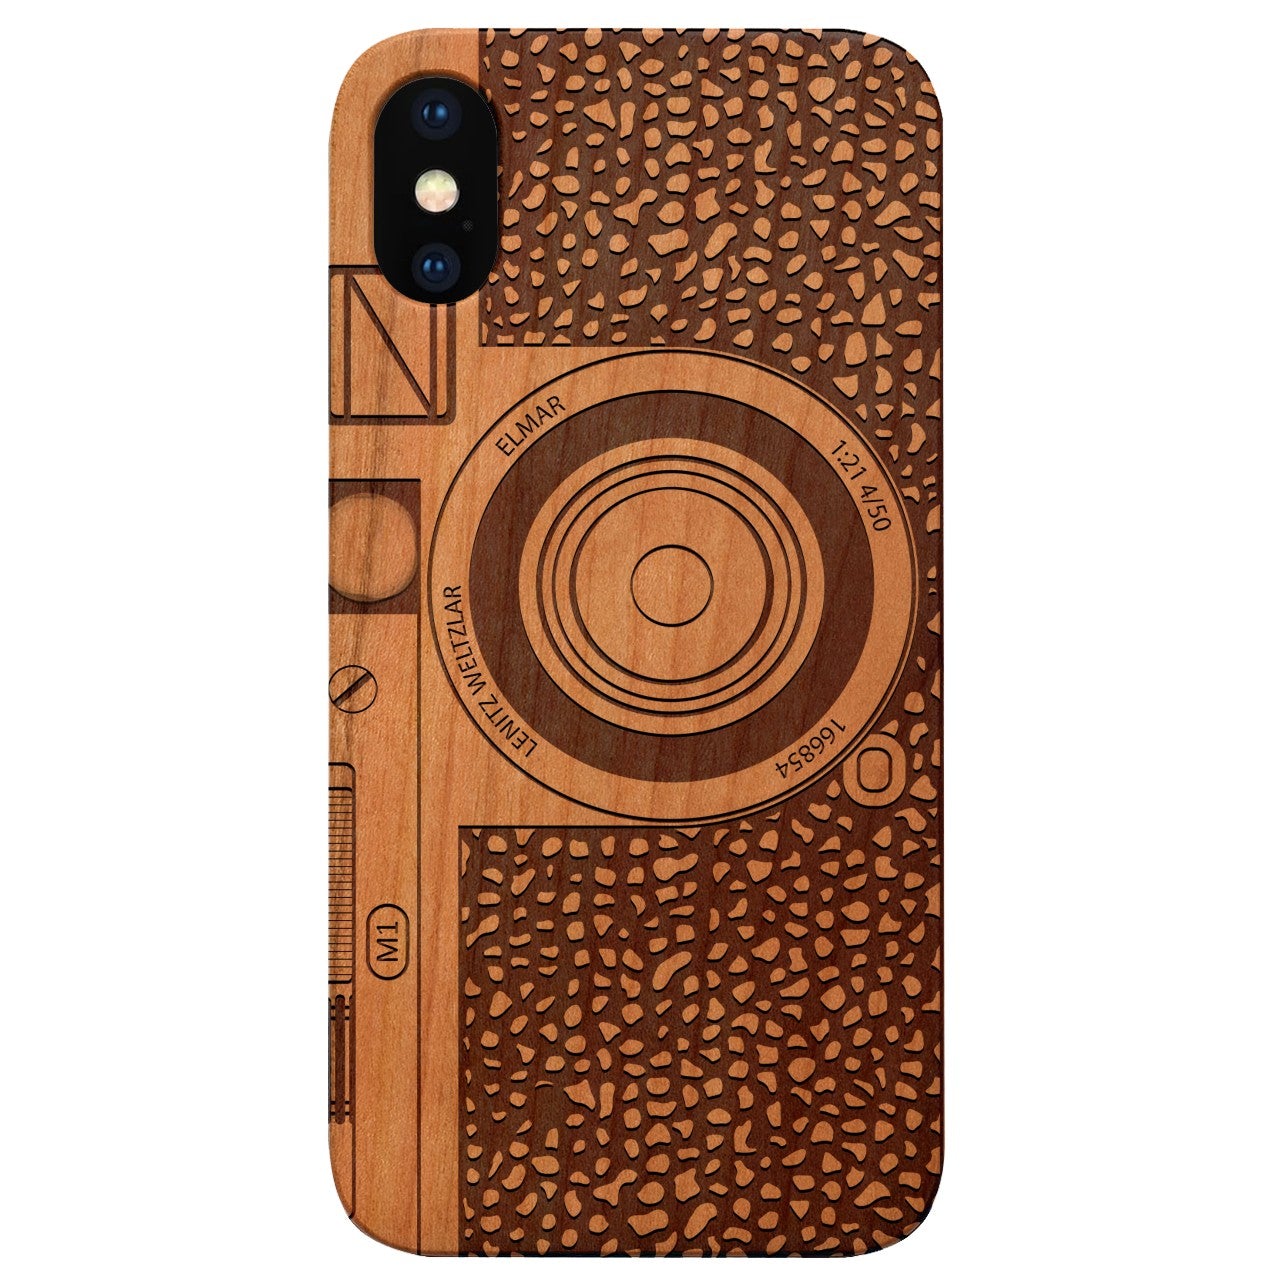  Camera - Engraved - Wooden Phone Case - IPhone 13 Models